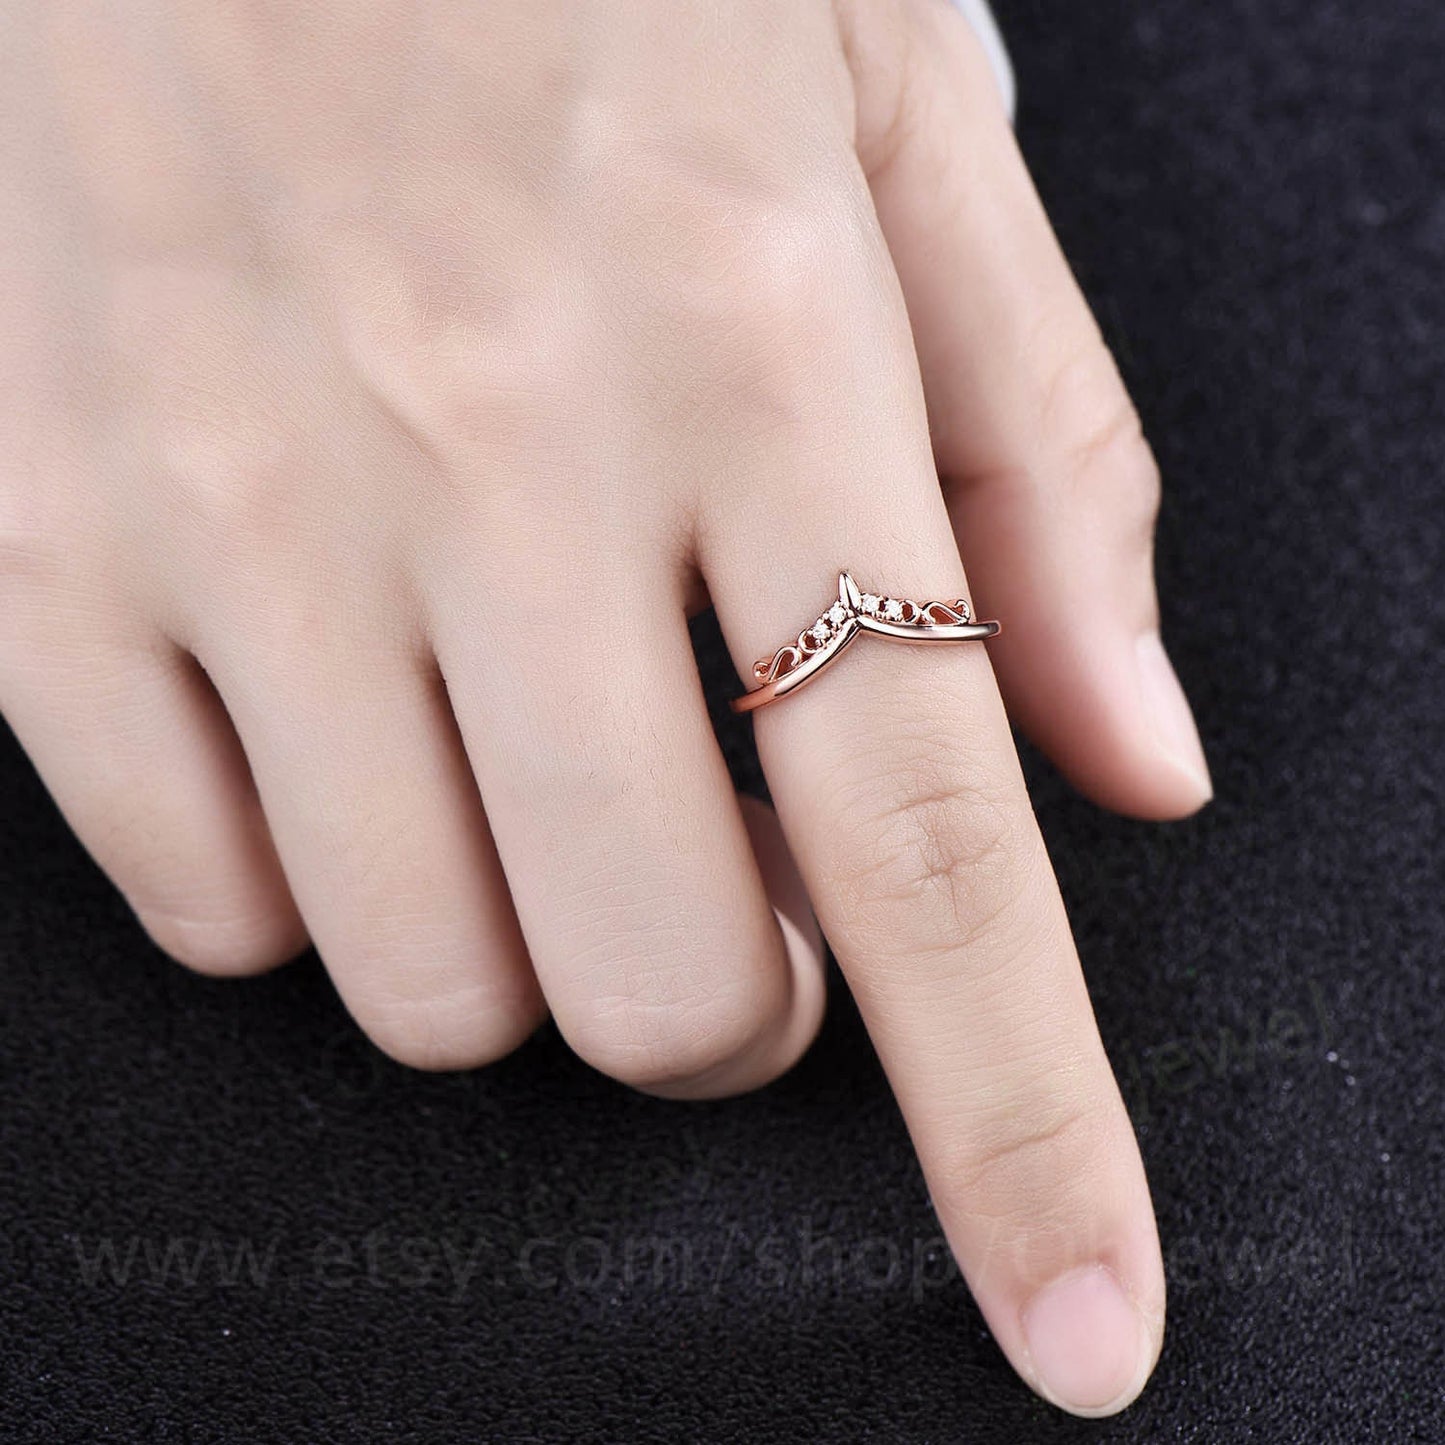 Unique moissanite wedding band 14k rose gold vintage style wedding ring band moon ring antique ring bridal anniversary band stacking ring